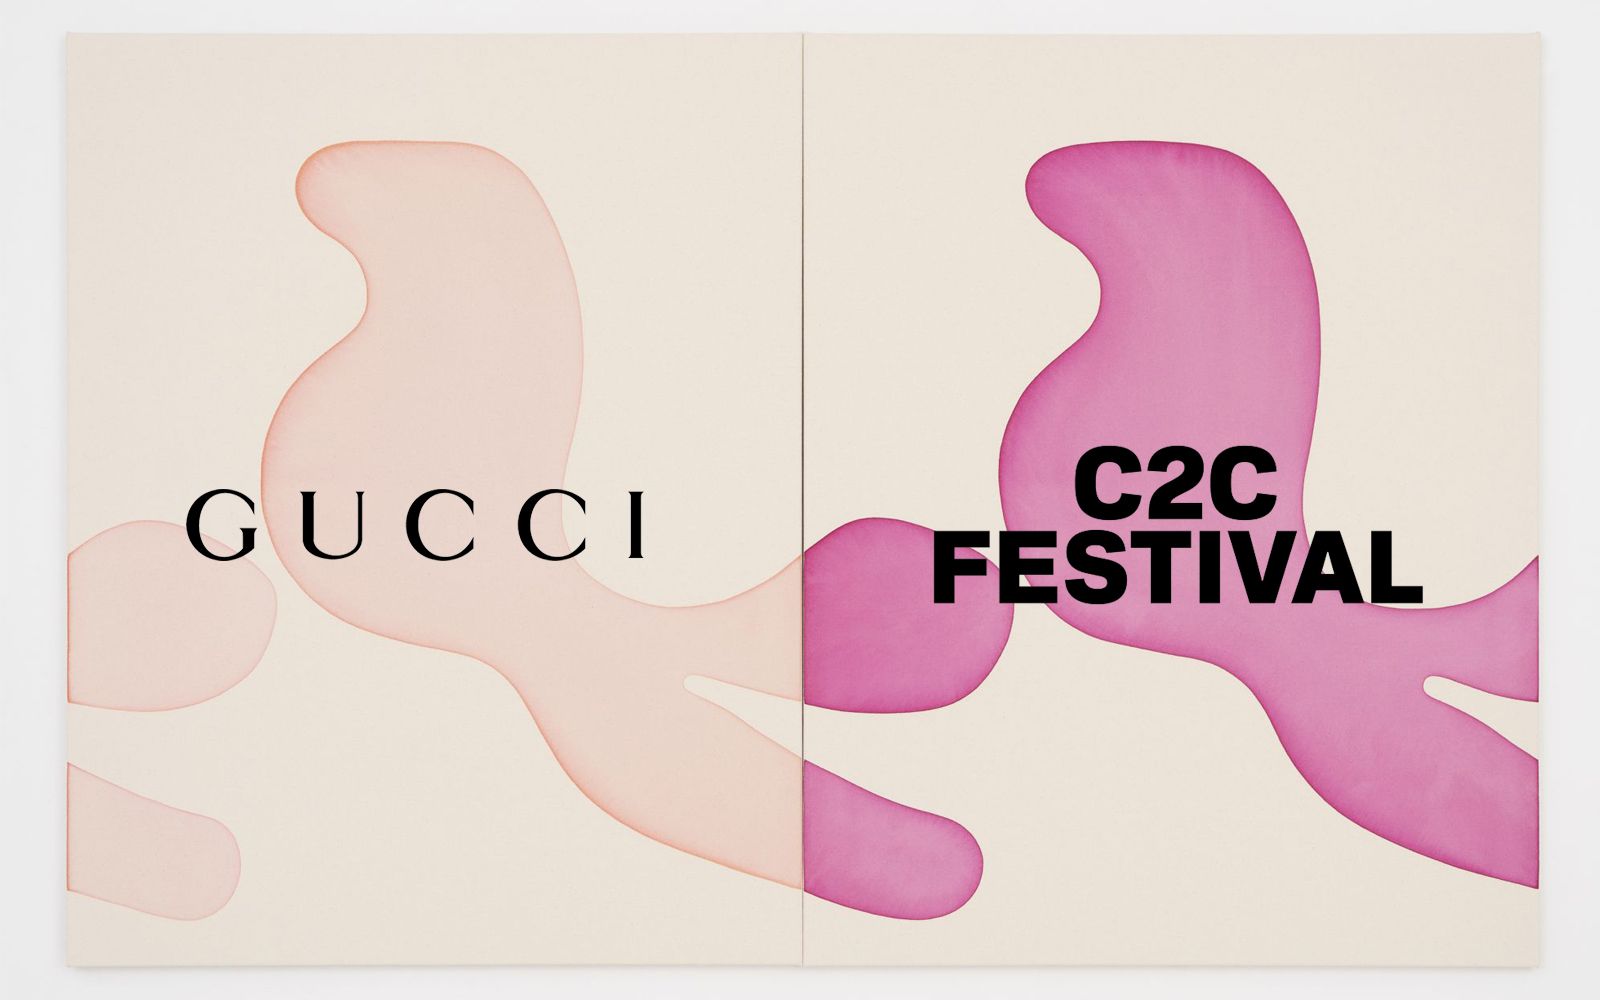 Gucci and C2C return to Milan in partnership with miart On September 16th and 17th with C2CMLN shared by Gucci 